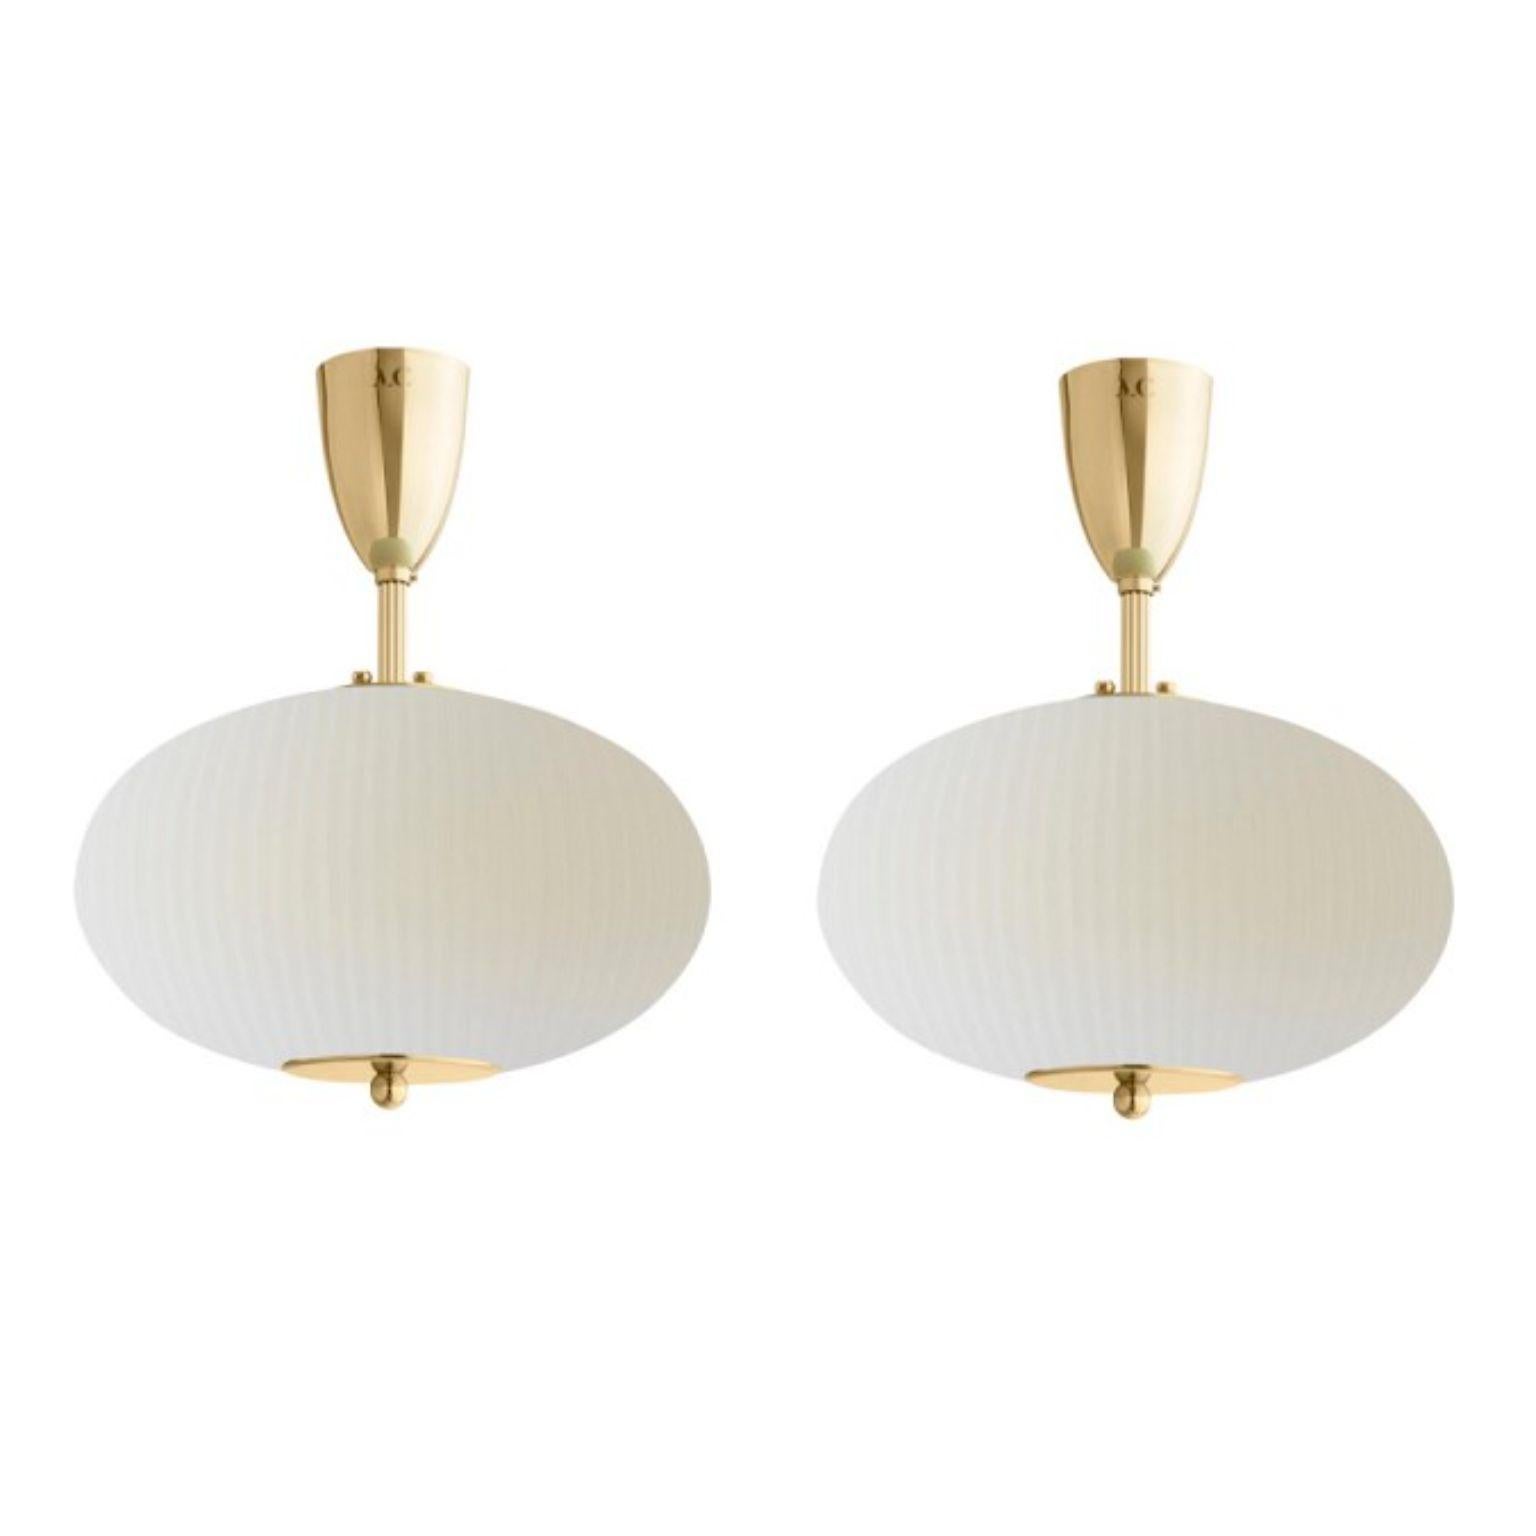 Ceiling lamp China 07 by Magic Circus Editions
Dimensions: H 40 x W 32 x D 32 cm
Materials: Brass, mouth blown glass sculpted with a diamond saw
Colour: ivory

Available finishes: Brass, nickel
Available colours: enamel soft white, soft rose, jade